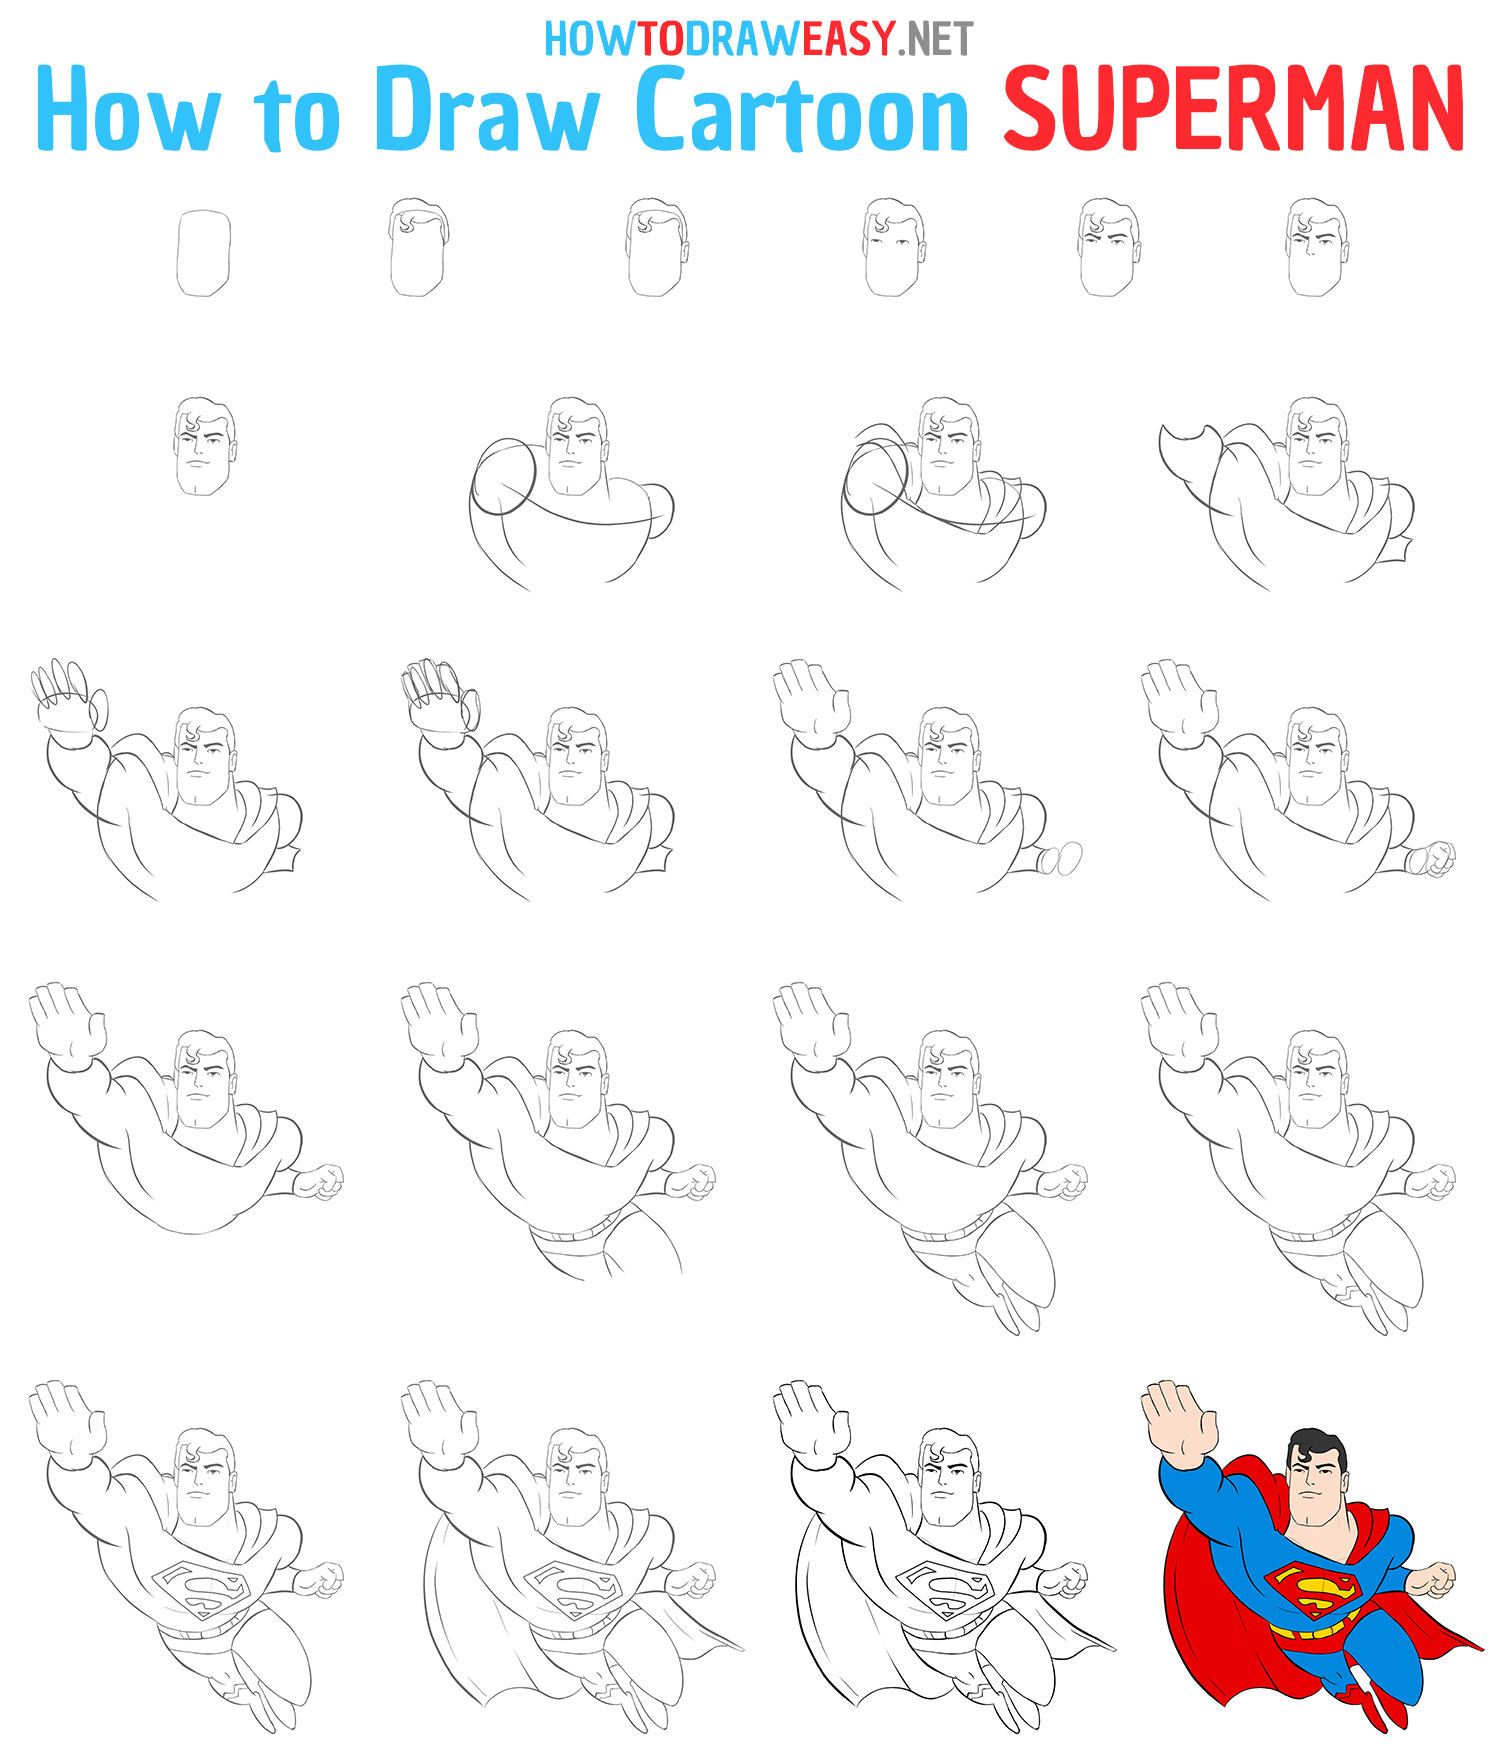 How to Draw Cartoon Superman Step by Step